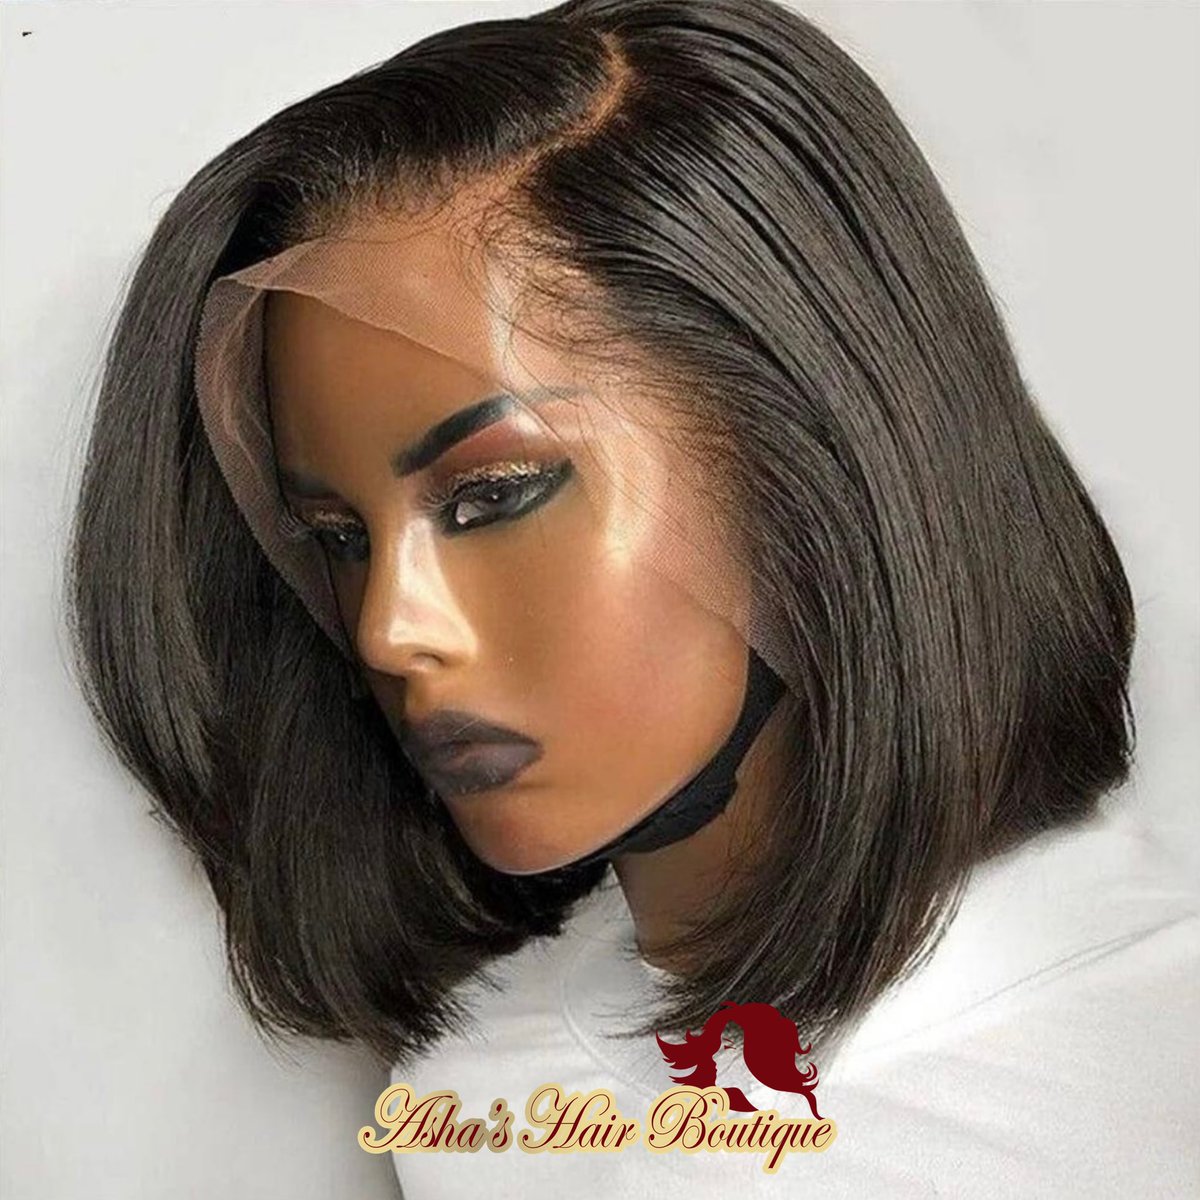 This unit gives sassy all the time 💁🏽‍♀️ our ‘Sassie’ bob unit is available in 8inch to 14inch! Interested, send enquiries to asha_hairboutique on IG #wiglife😍 #wigslondon #hairsupplier #vendor #bobwigsforsale #ᴡɪɢʟᴏᴠᴇʀ